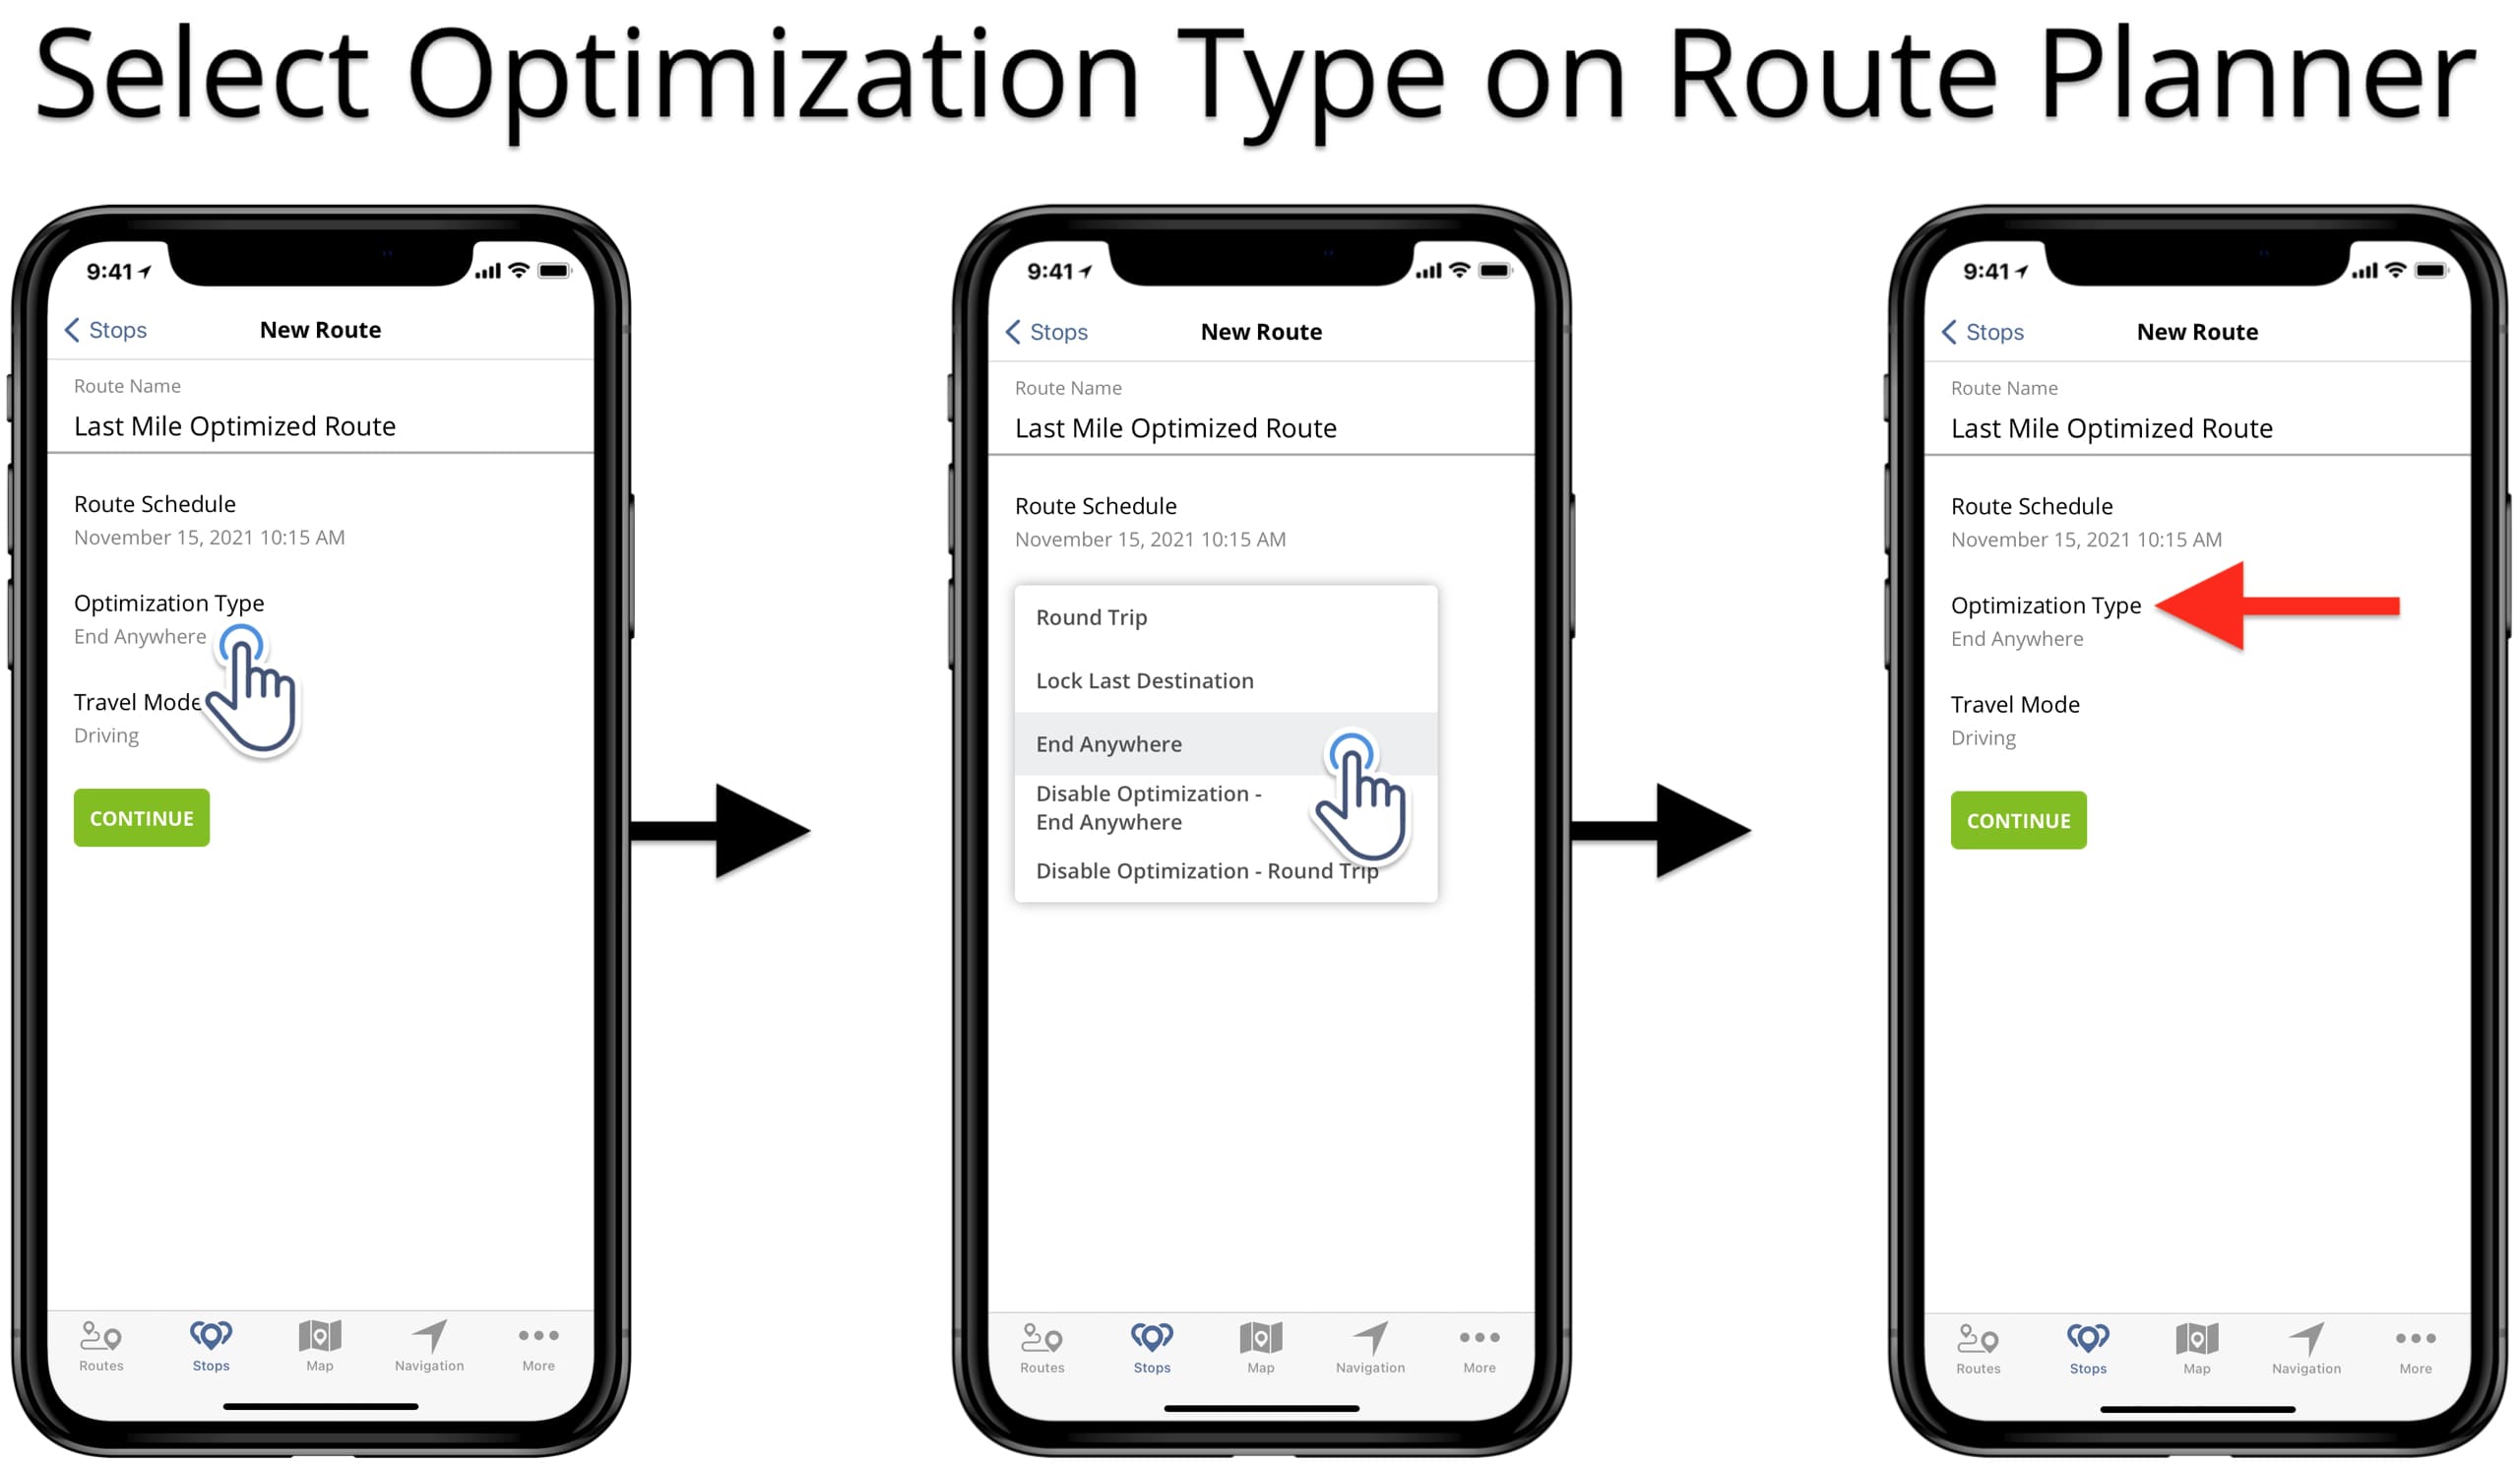 Select optimization type for planning a route on Route4Me's iOS mobile routing app.